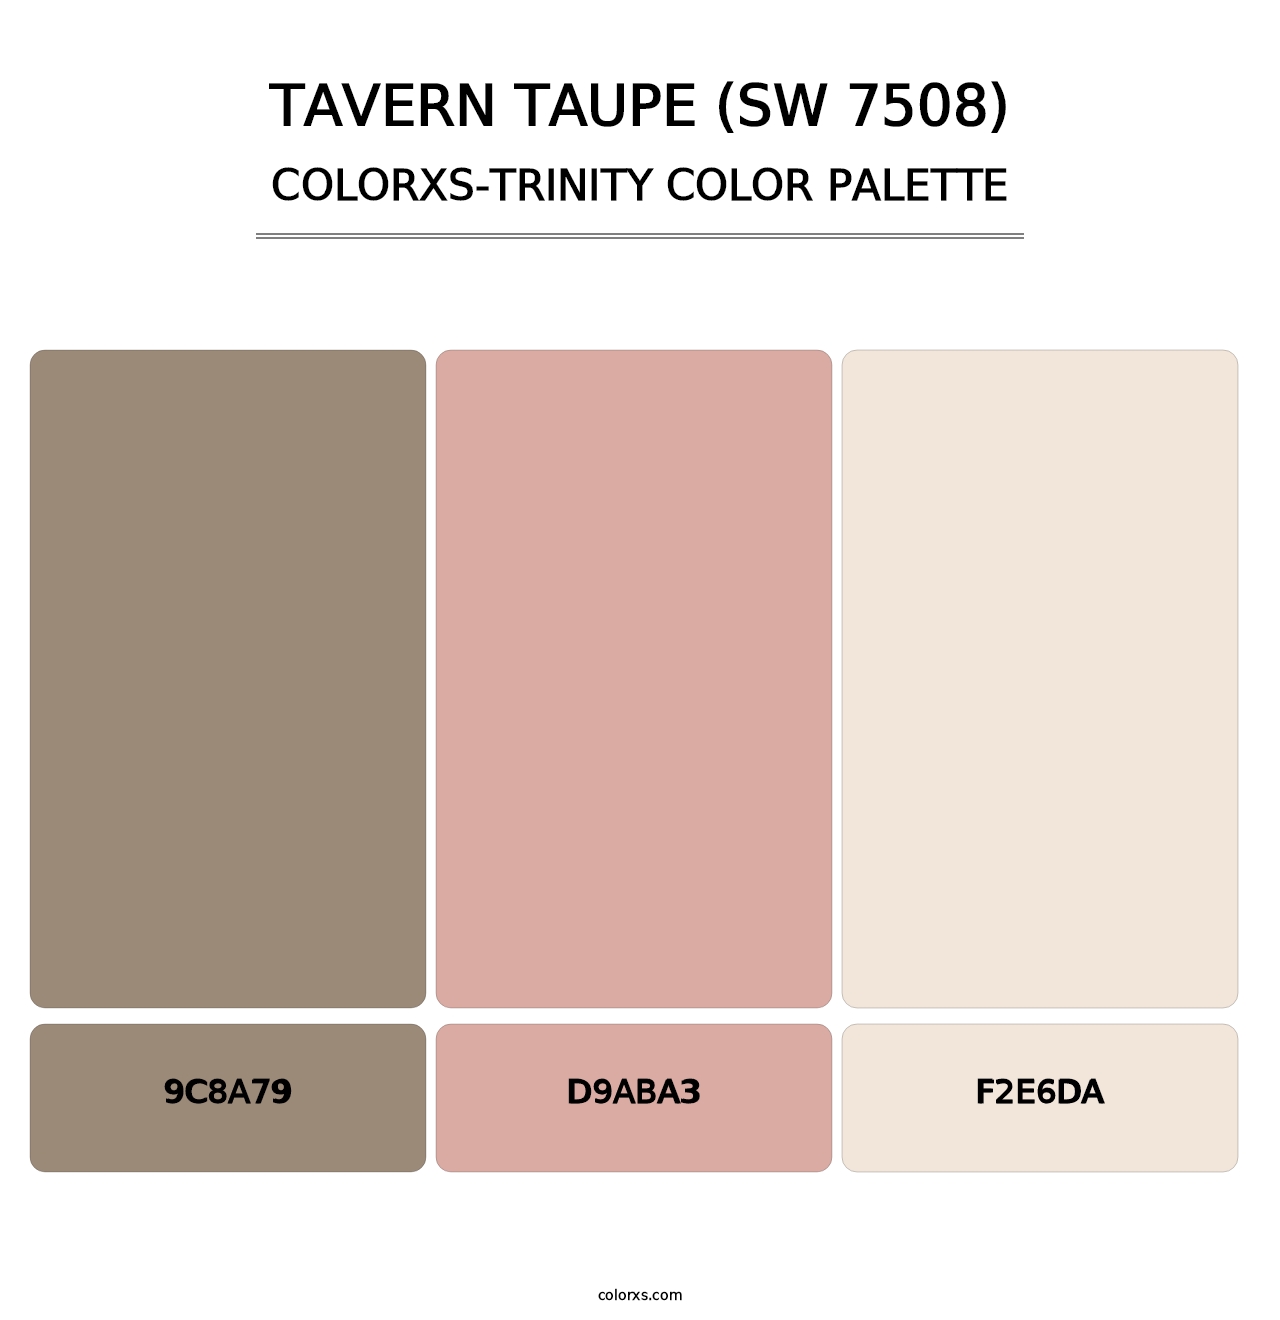 Tavern Taupe (SW 7508) - Colorxs Trinity Palette